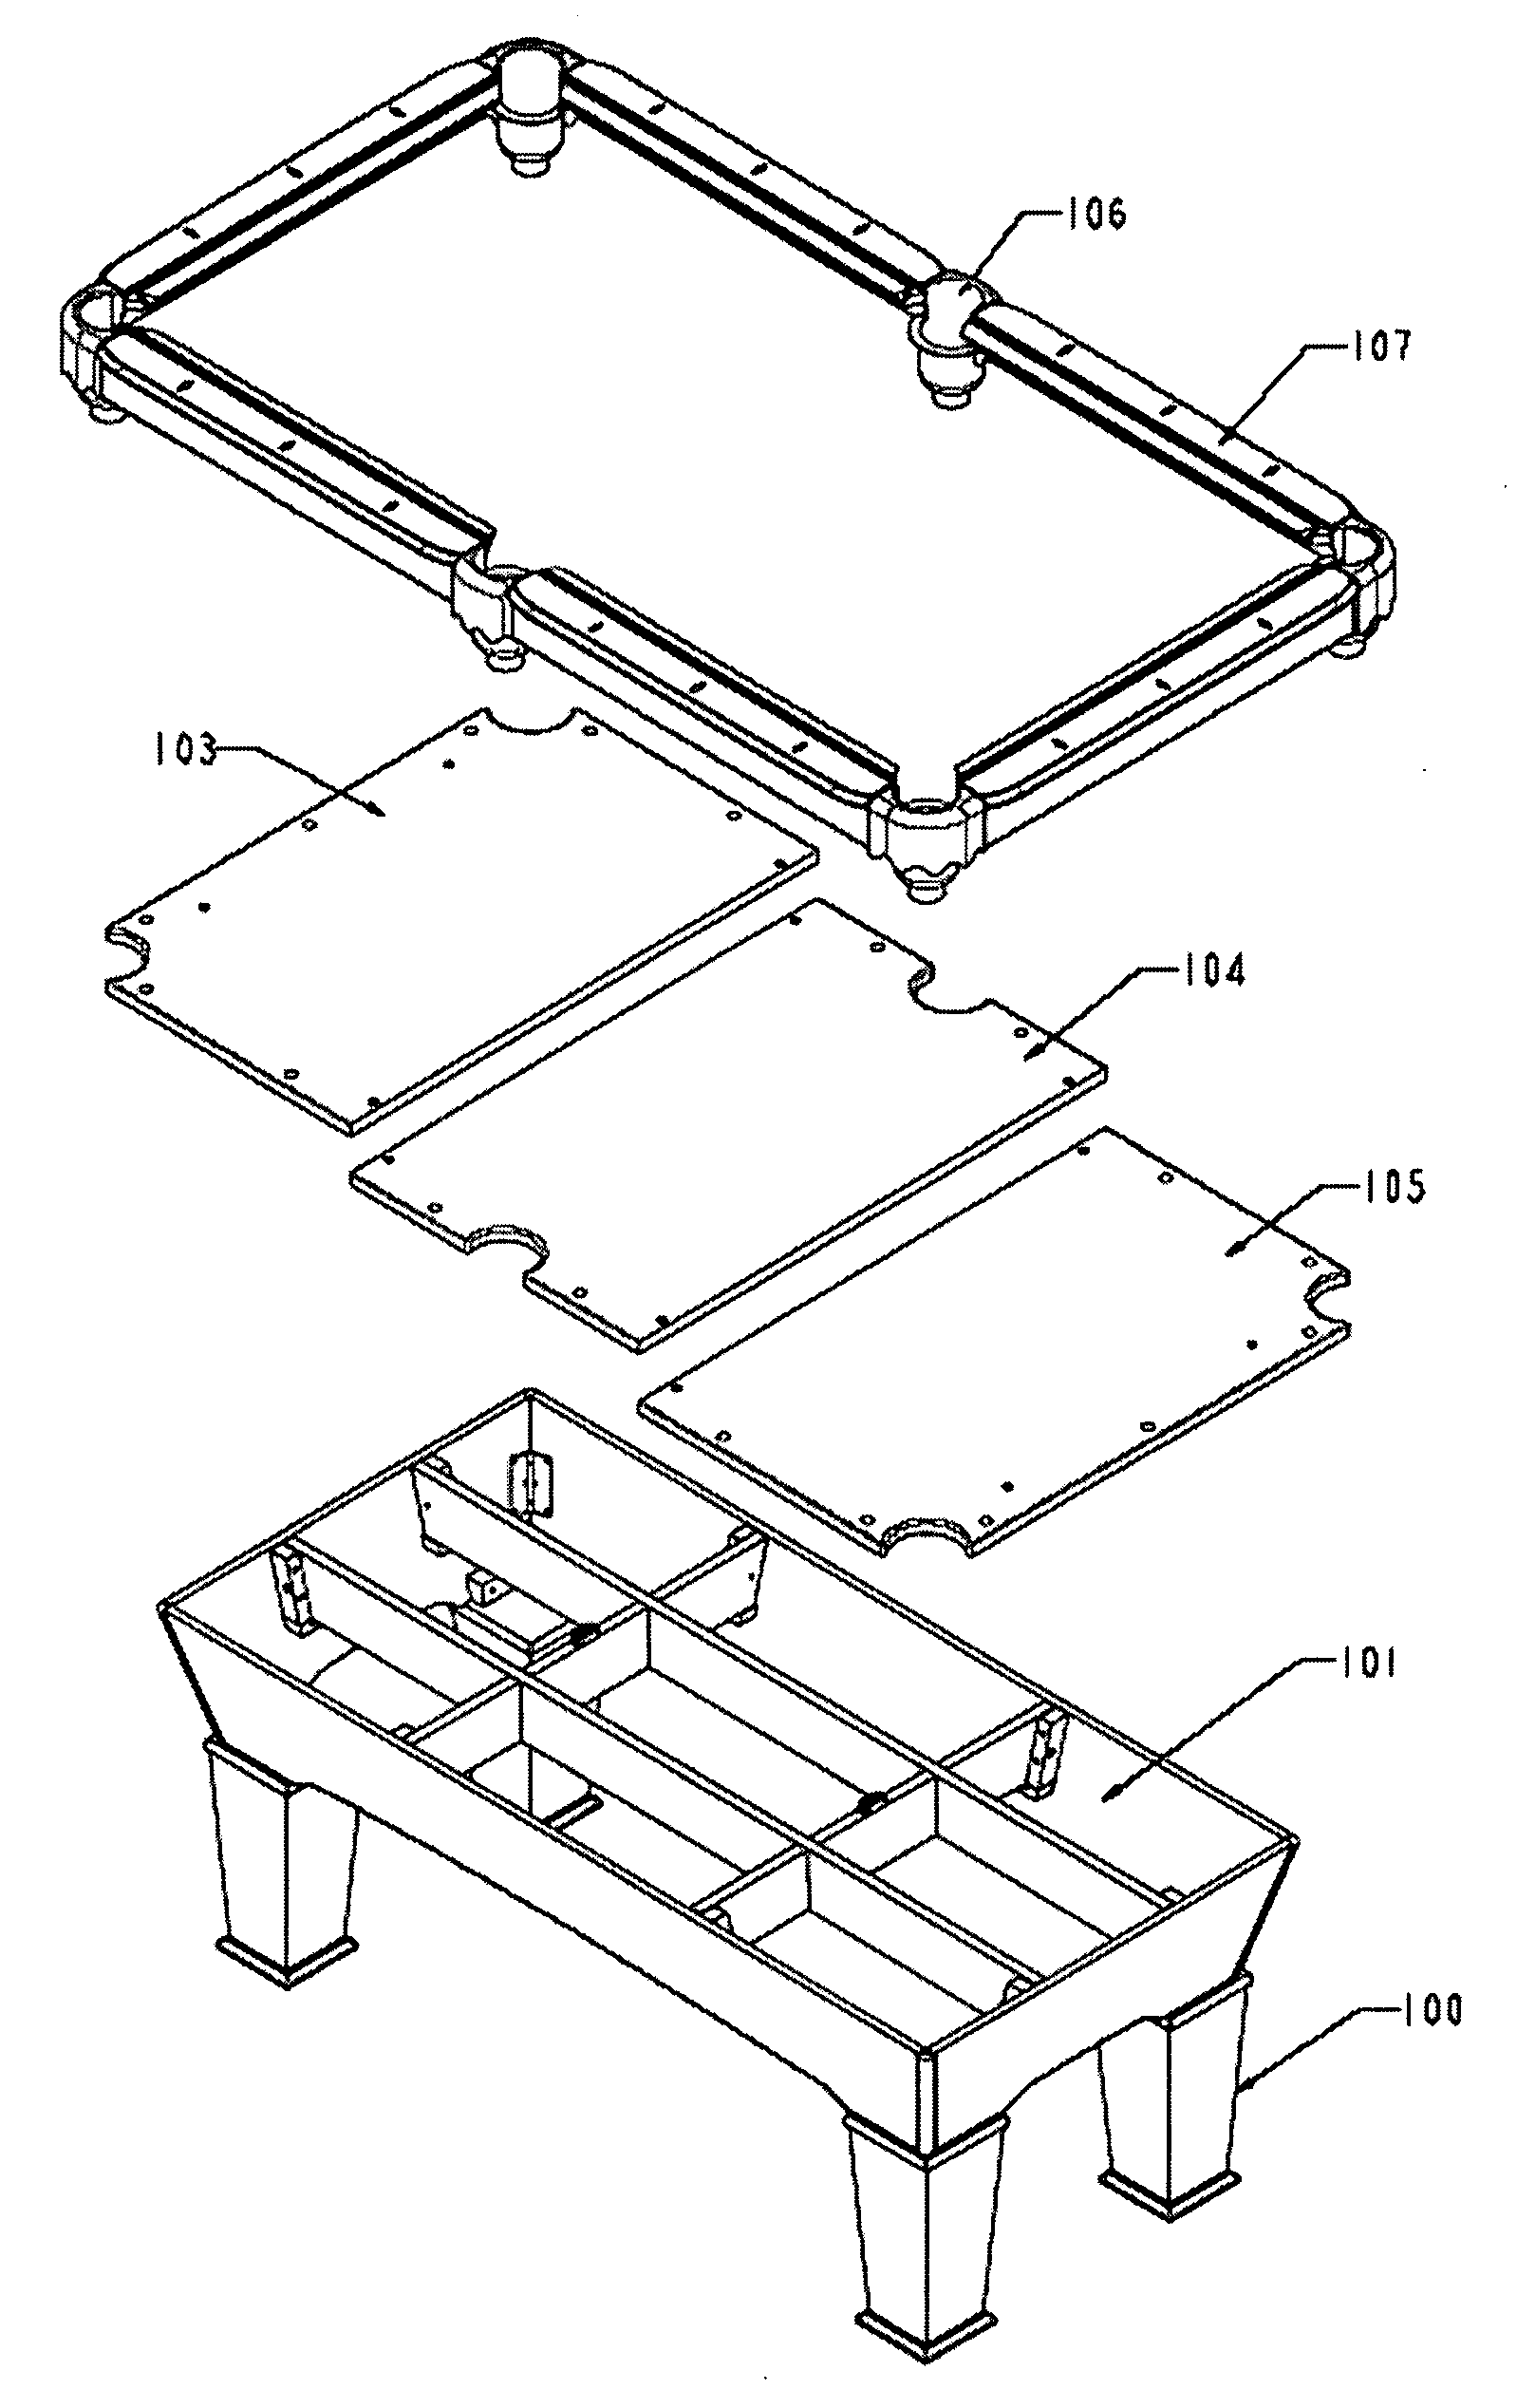 Billiard table with reinforcement on structure and support for the heavy slate